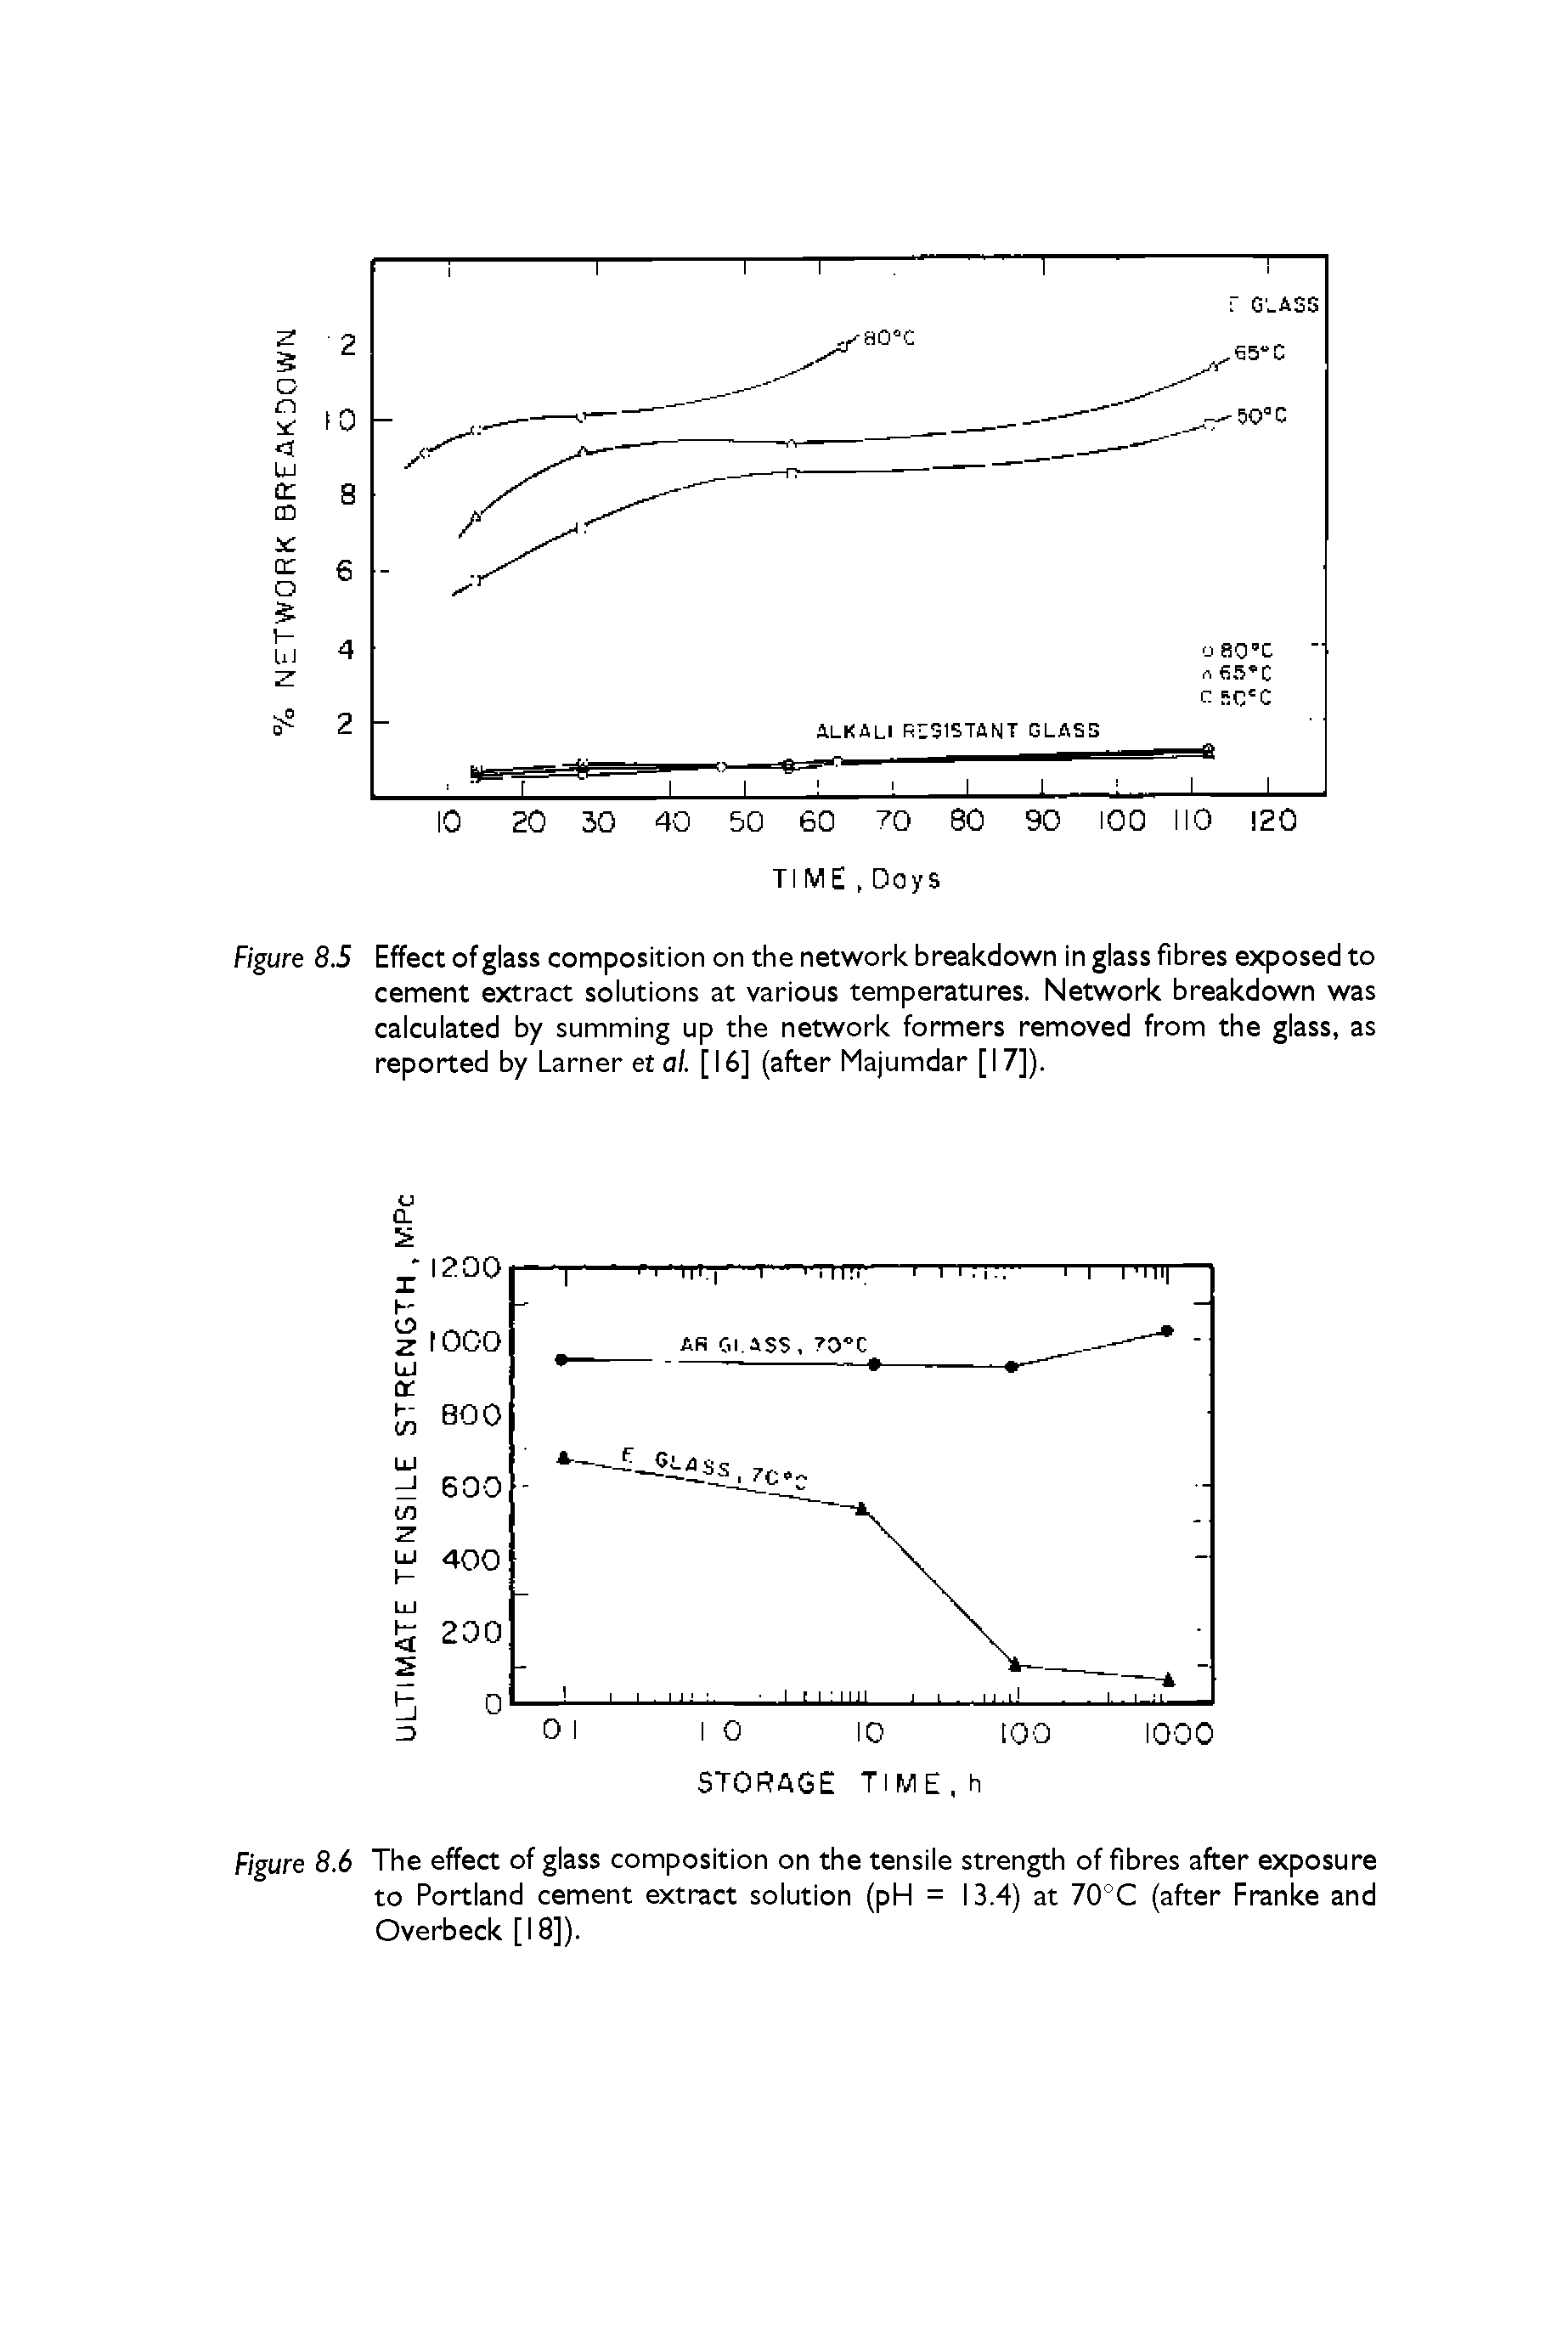 Figure 8.5 Effect of glass composition on the network breakdown in glass fibres exposed to cement extract solutions at various temperatures. Network breakdown was calculated by summing up the network formers removed from the glass, as reported by Lamer et al. [ 16] (after Majumdar [17]).